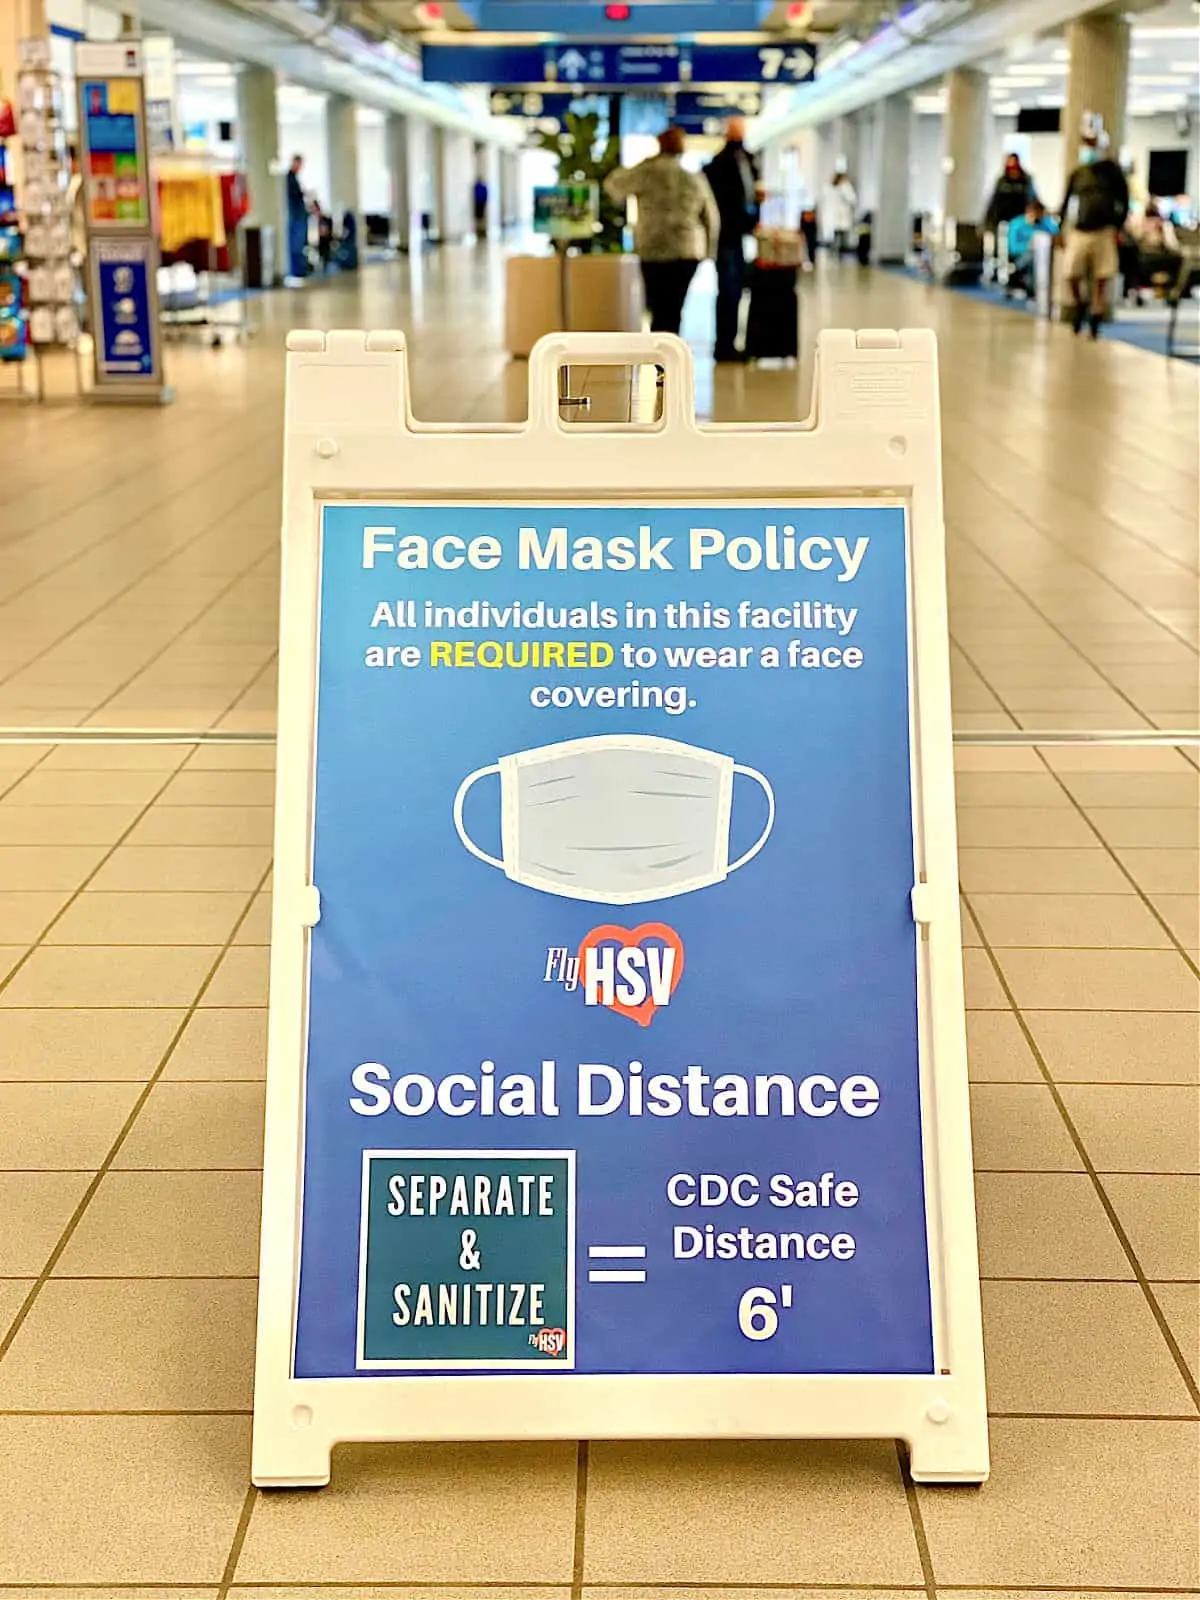 Face Mask Policy sign in walkway at airport.